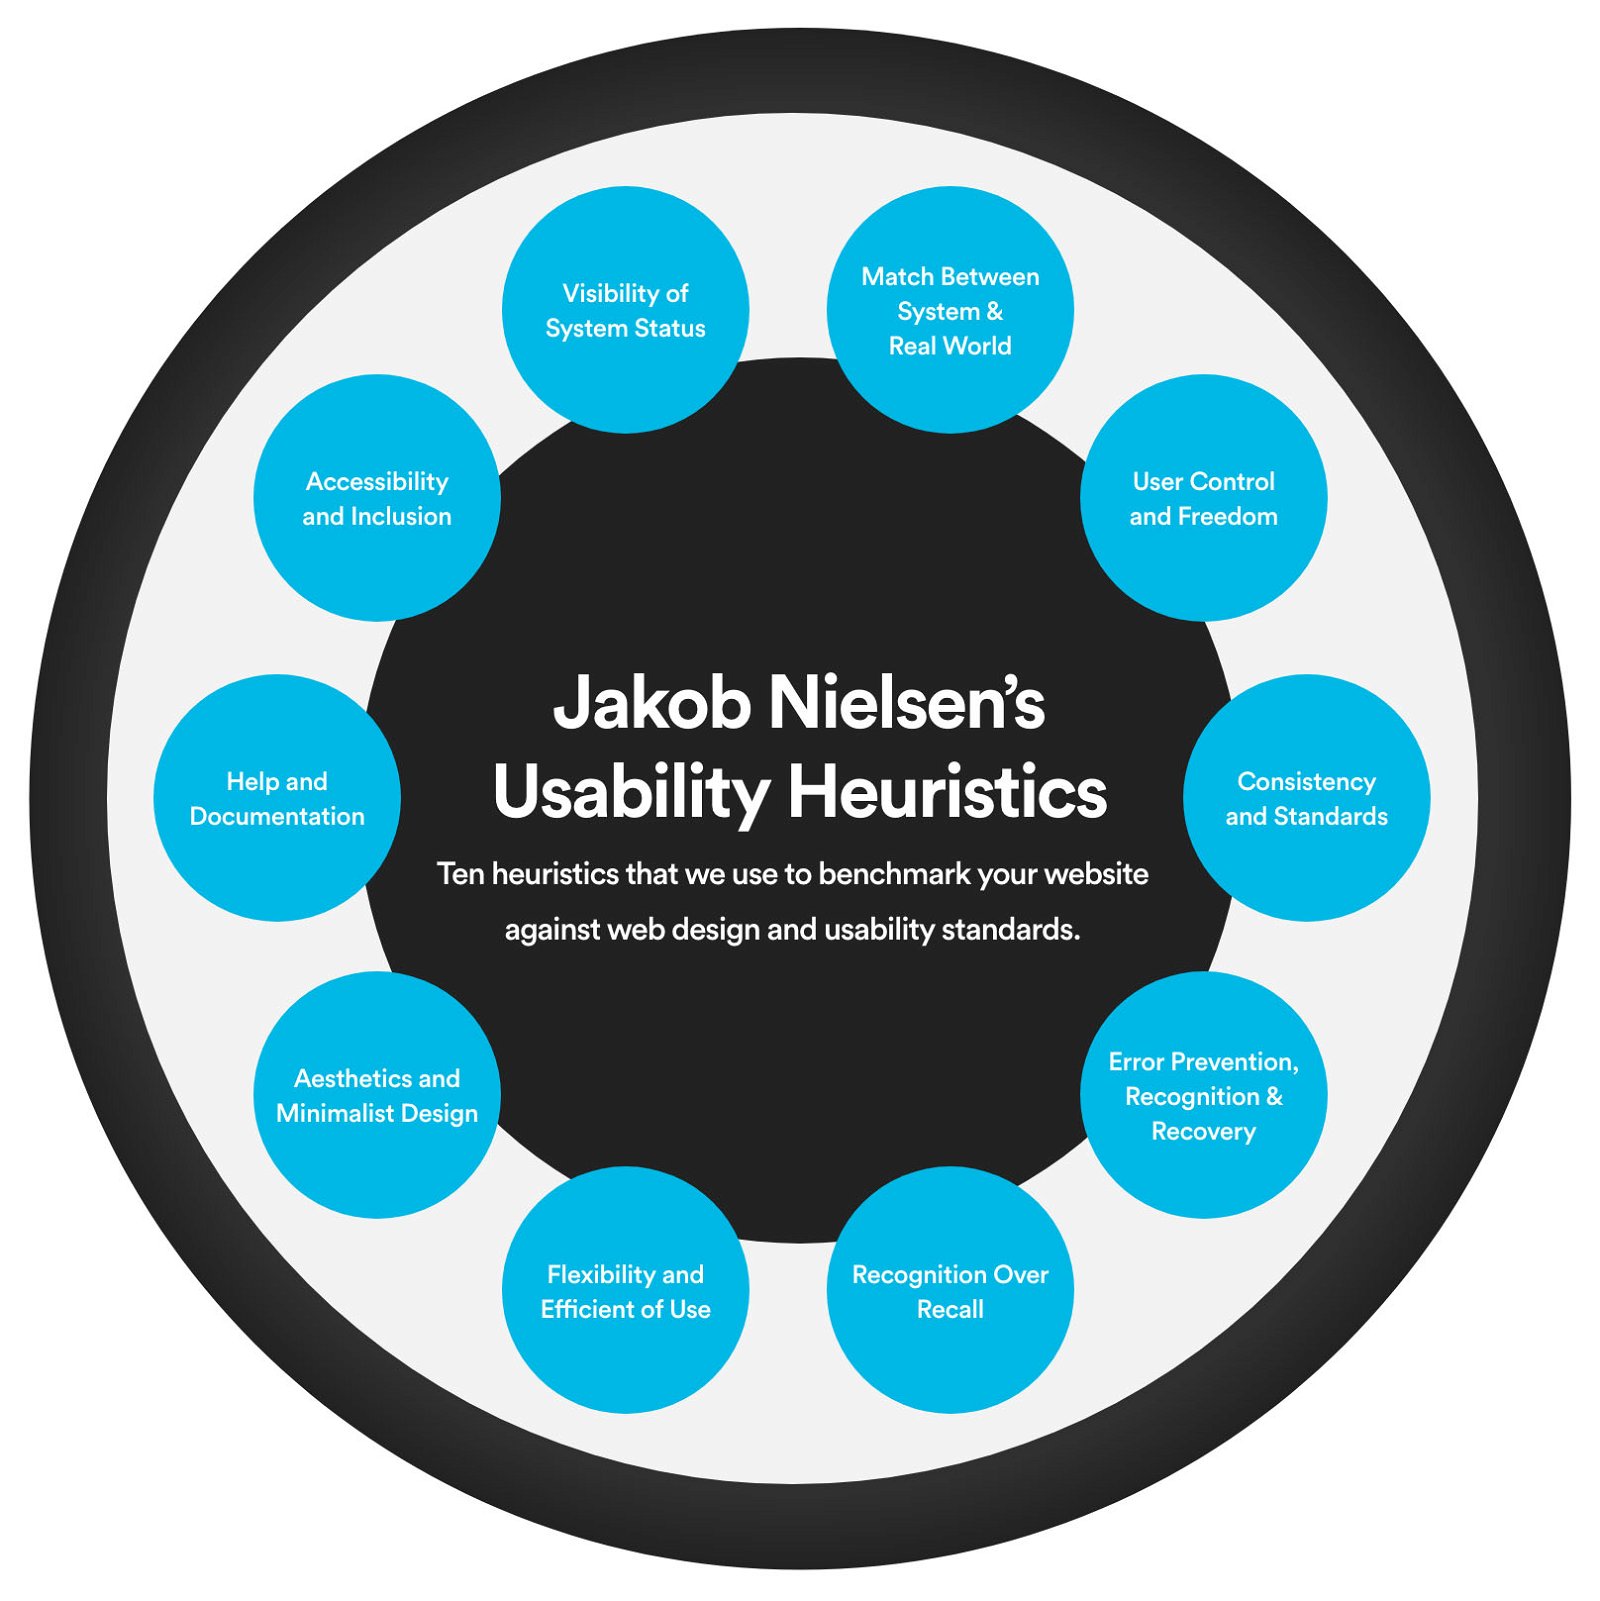 A diagram that lists Jakob Nielsen's 10 Usability Heuristics and how Damteq uses these in their UX audits.